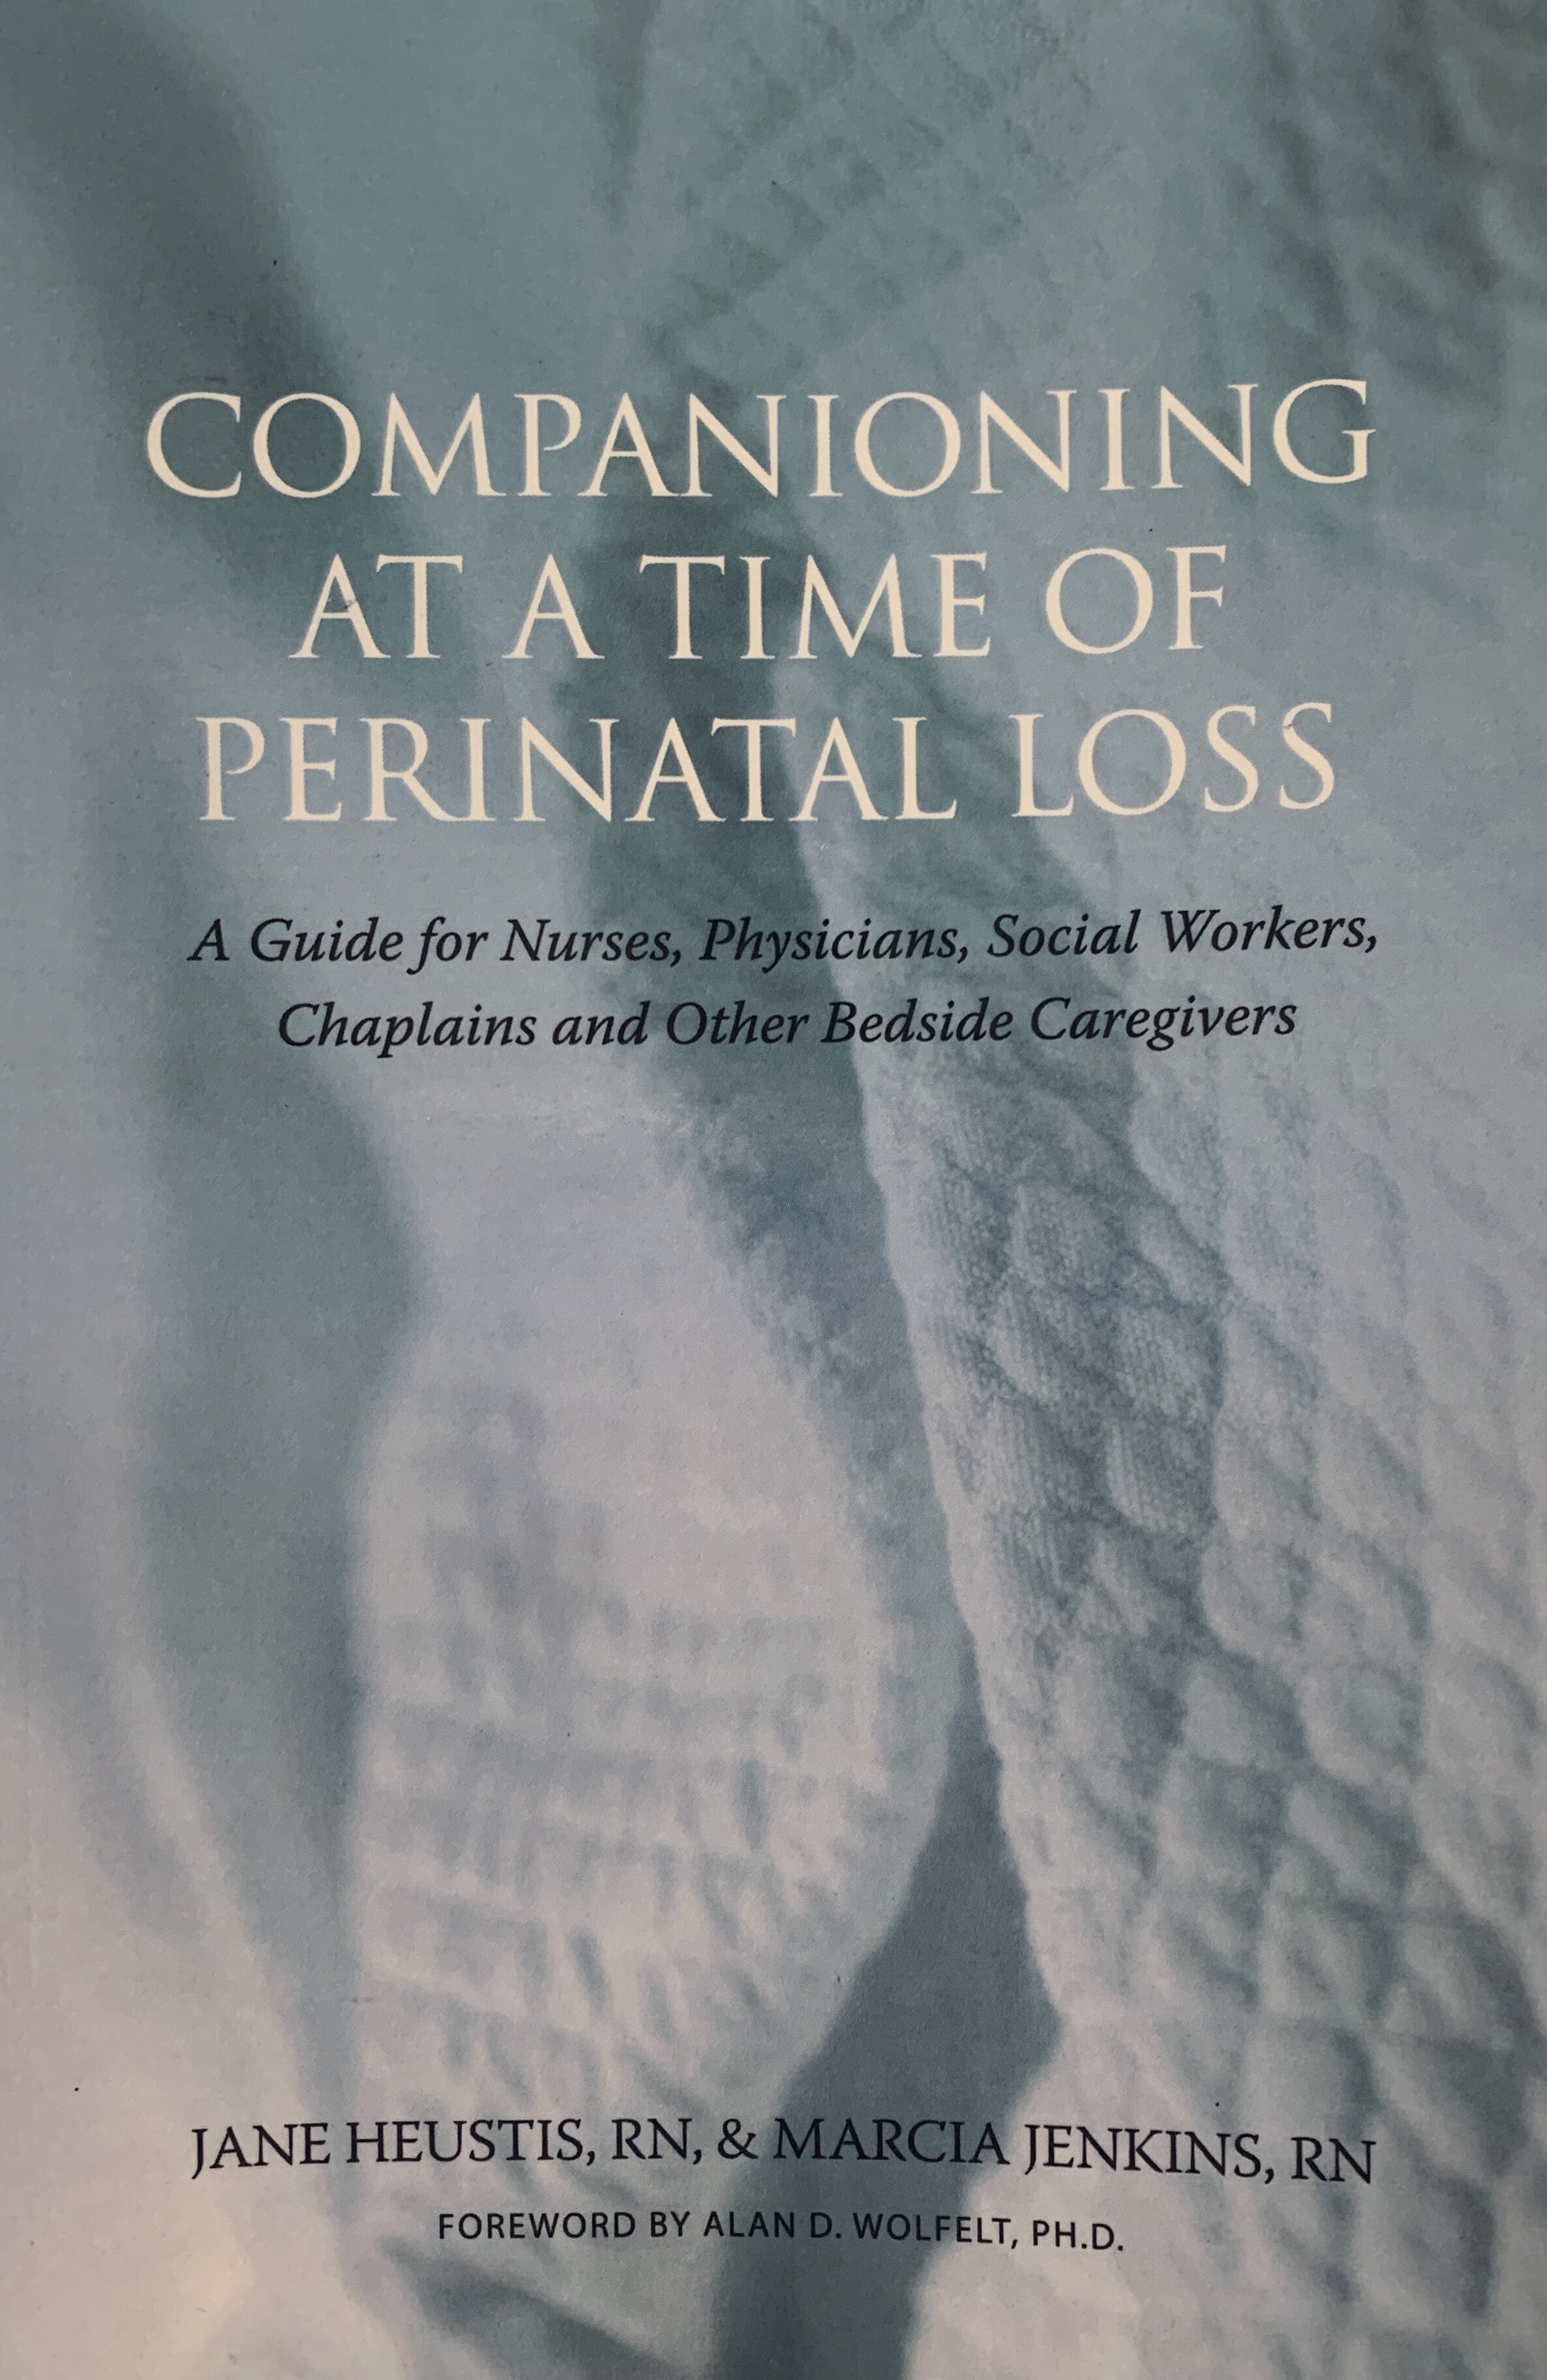 Companioning at a Time of Perinatal Loss: A Guide for Nurses, Physicians, Social Workers, Chaplains and Other Bedside Caregivers (Copy) (Copy) (Copy)